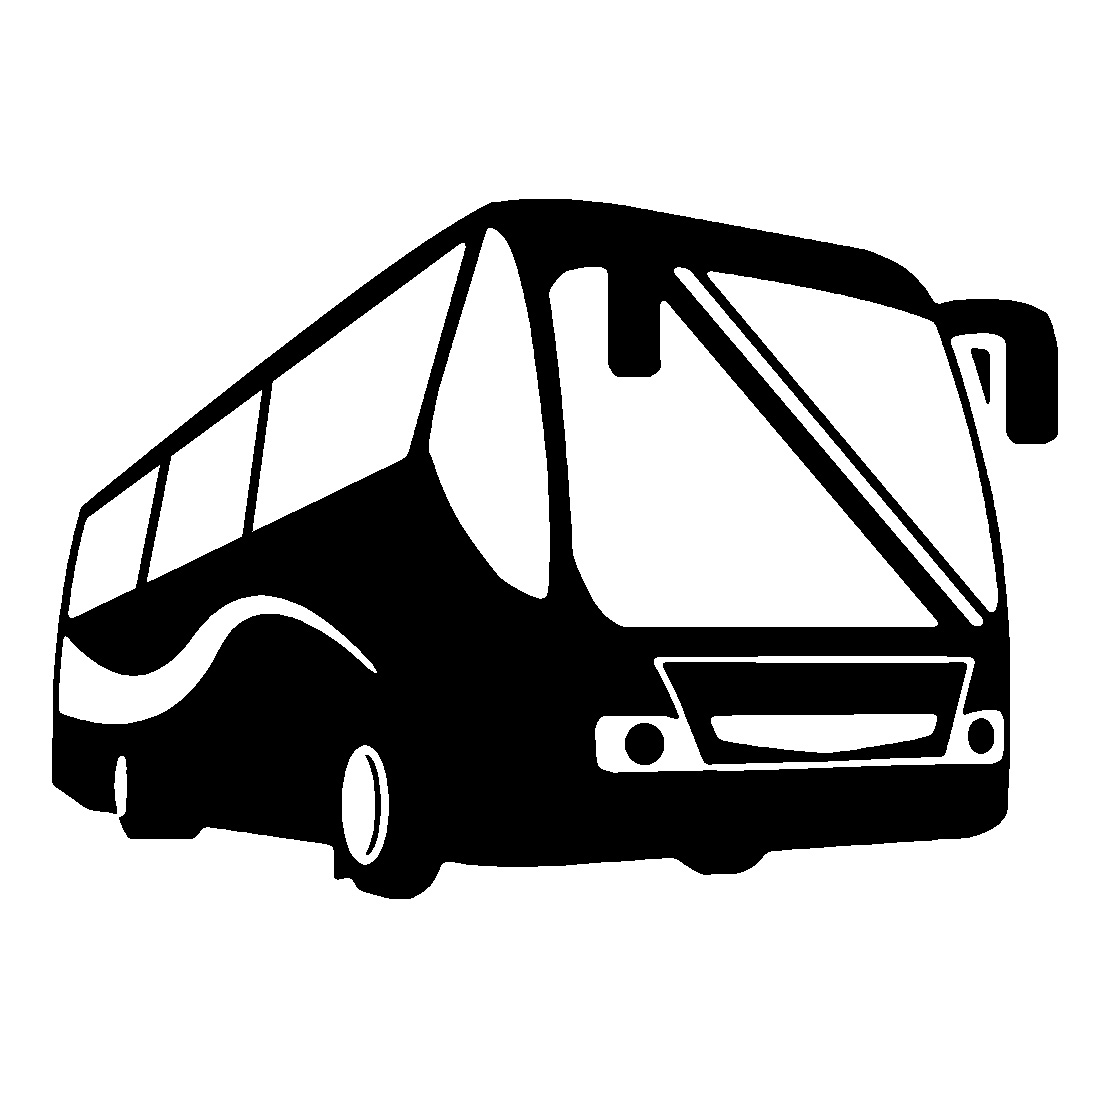 Bus black and white clipart